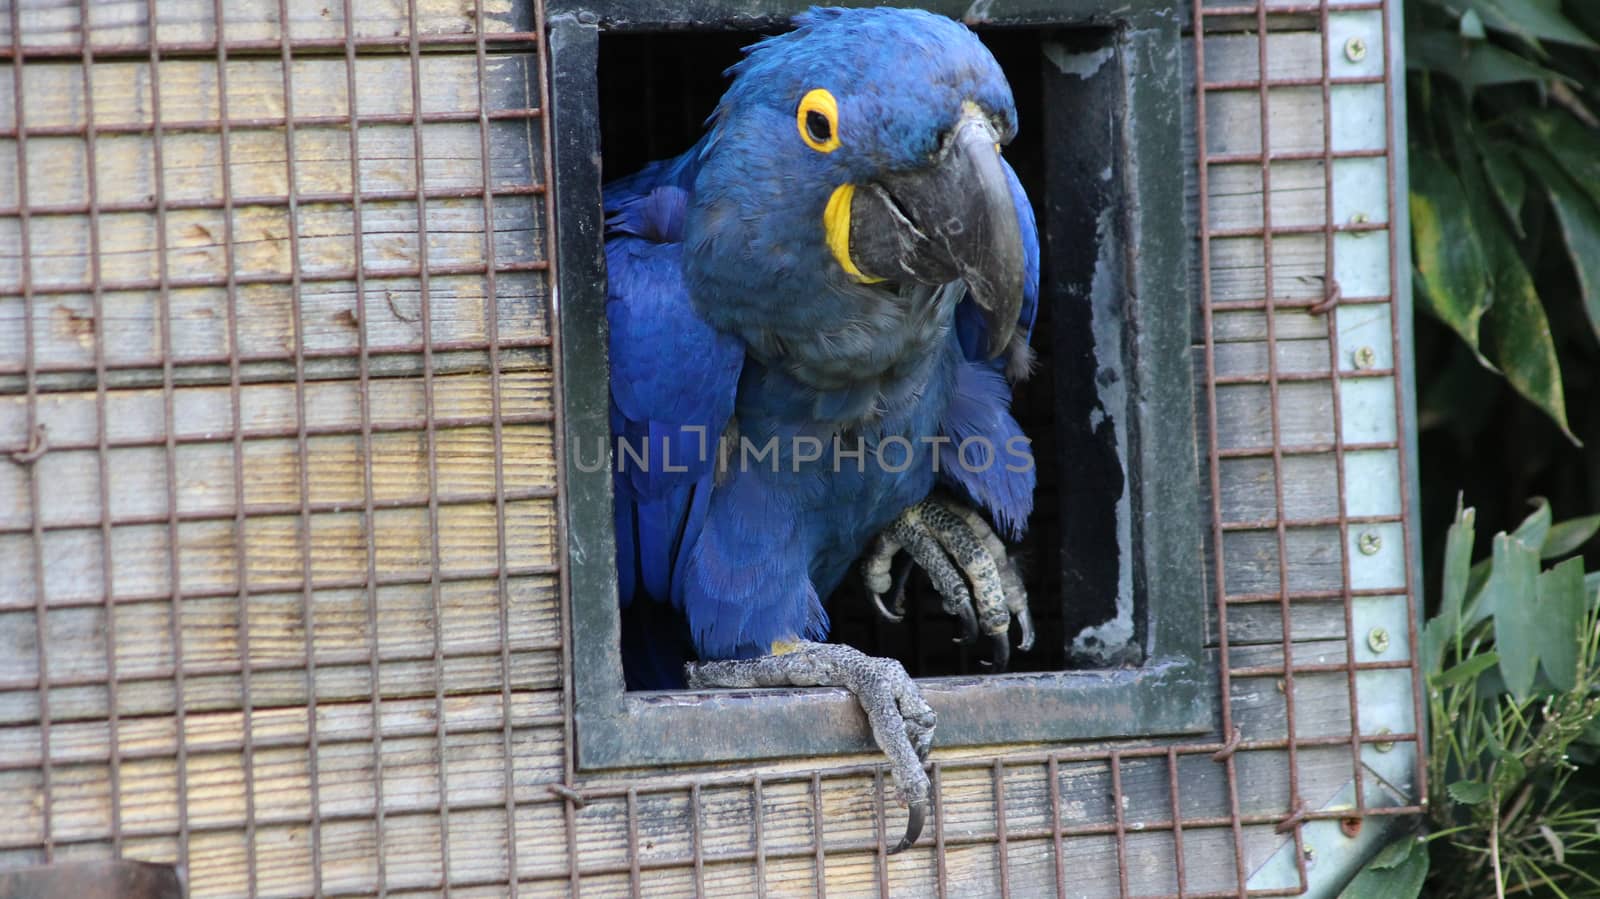 Hyacinth macaw (Anodorhynchus hyacinthinus) is a parrot native to central and eastern South America